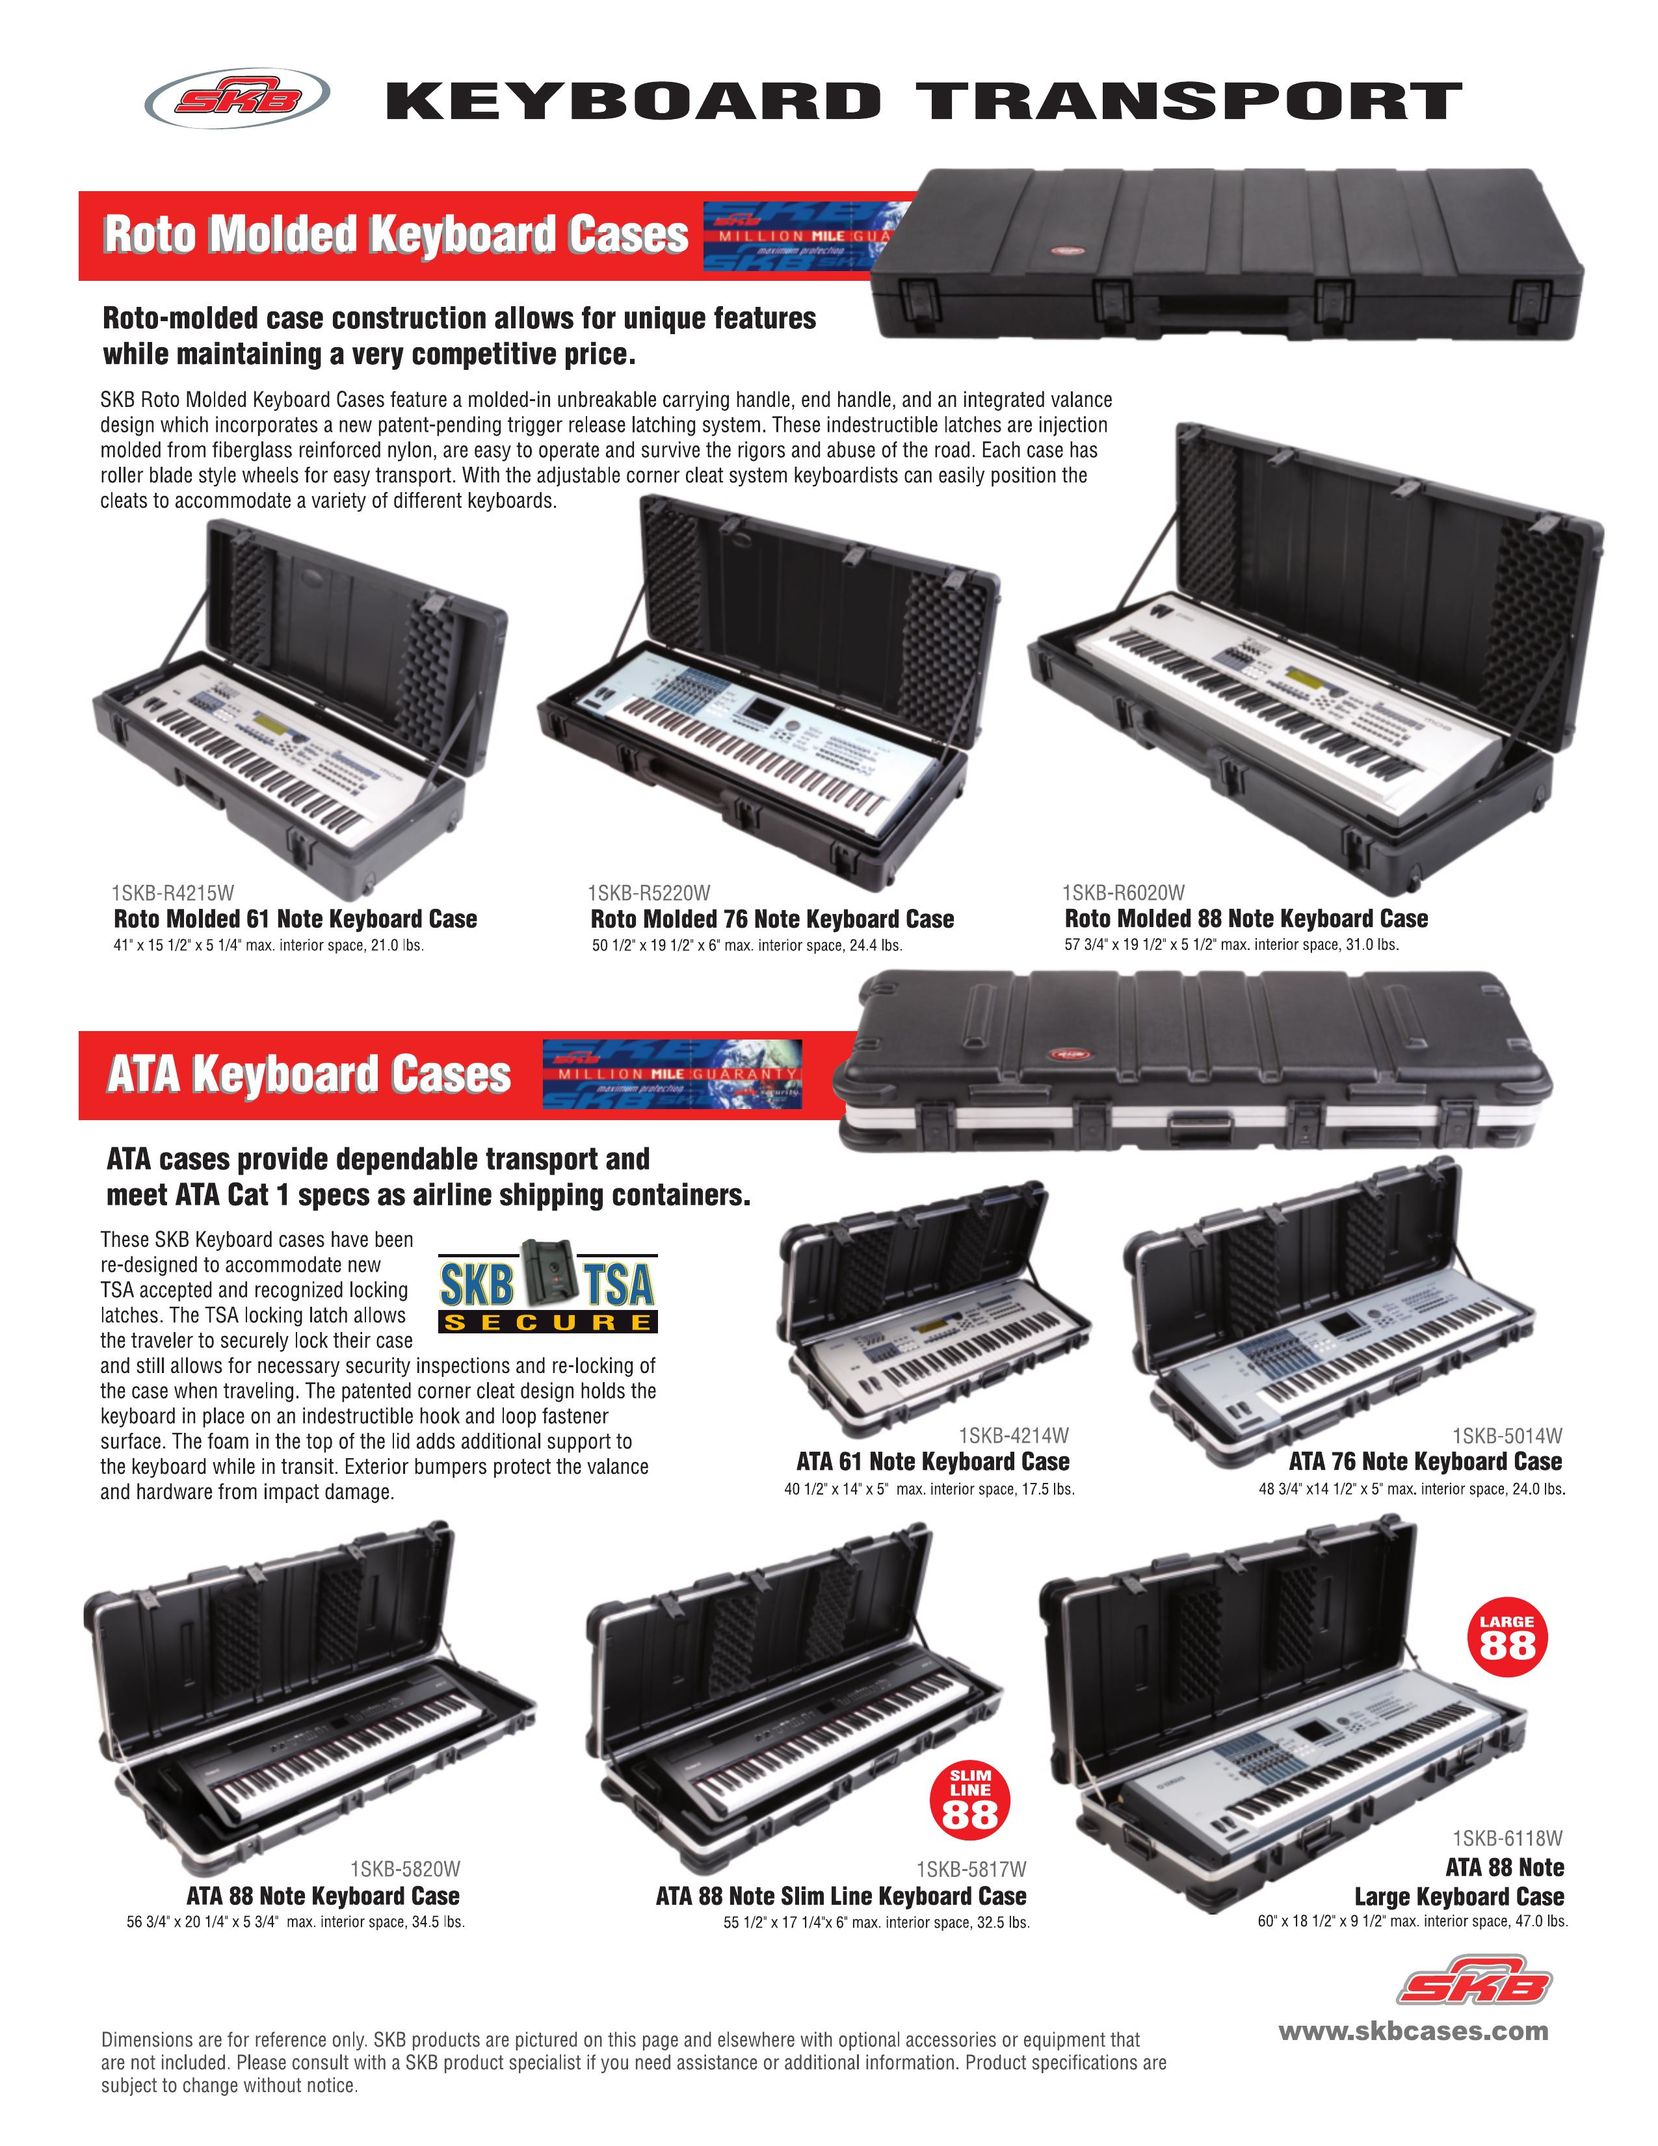 SKB Roto Molded Keyboard Case Carrying Case User Manual